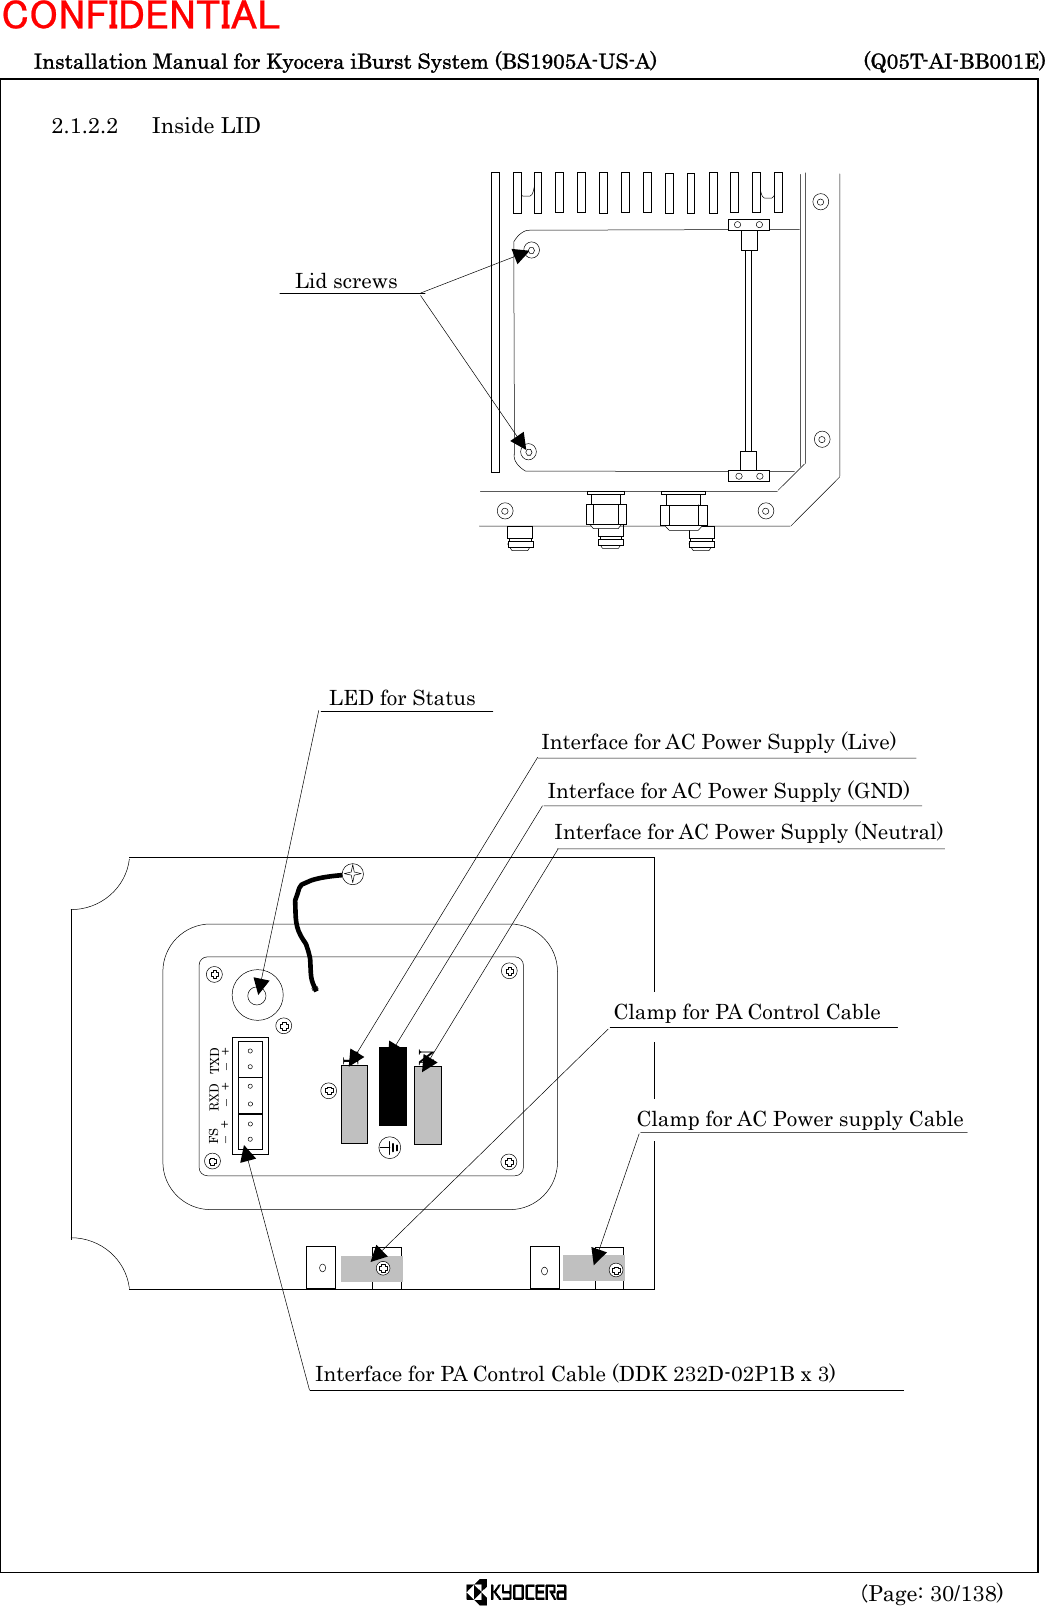  Installation Manual for Kyocera iBurst System (BS1905A-US-A)     (Q05T-AI-BB001E) (Page: 30/138) CONFIDENTIAL  2.1.2.2 Inside LID                                             Lid screws L N   FS – +  RXD – +  TXD – + Clamp for PA Control Cable   LED for Status Interface for AC Power Supply (Live) Interface for AC Power Supply (GND) Interface for AC Power Supply (Neutral) Clamp for AC Power supply Cable Interface for PA Control Cable (DDK 232D-02P1B x 3) 